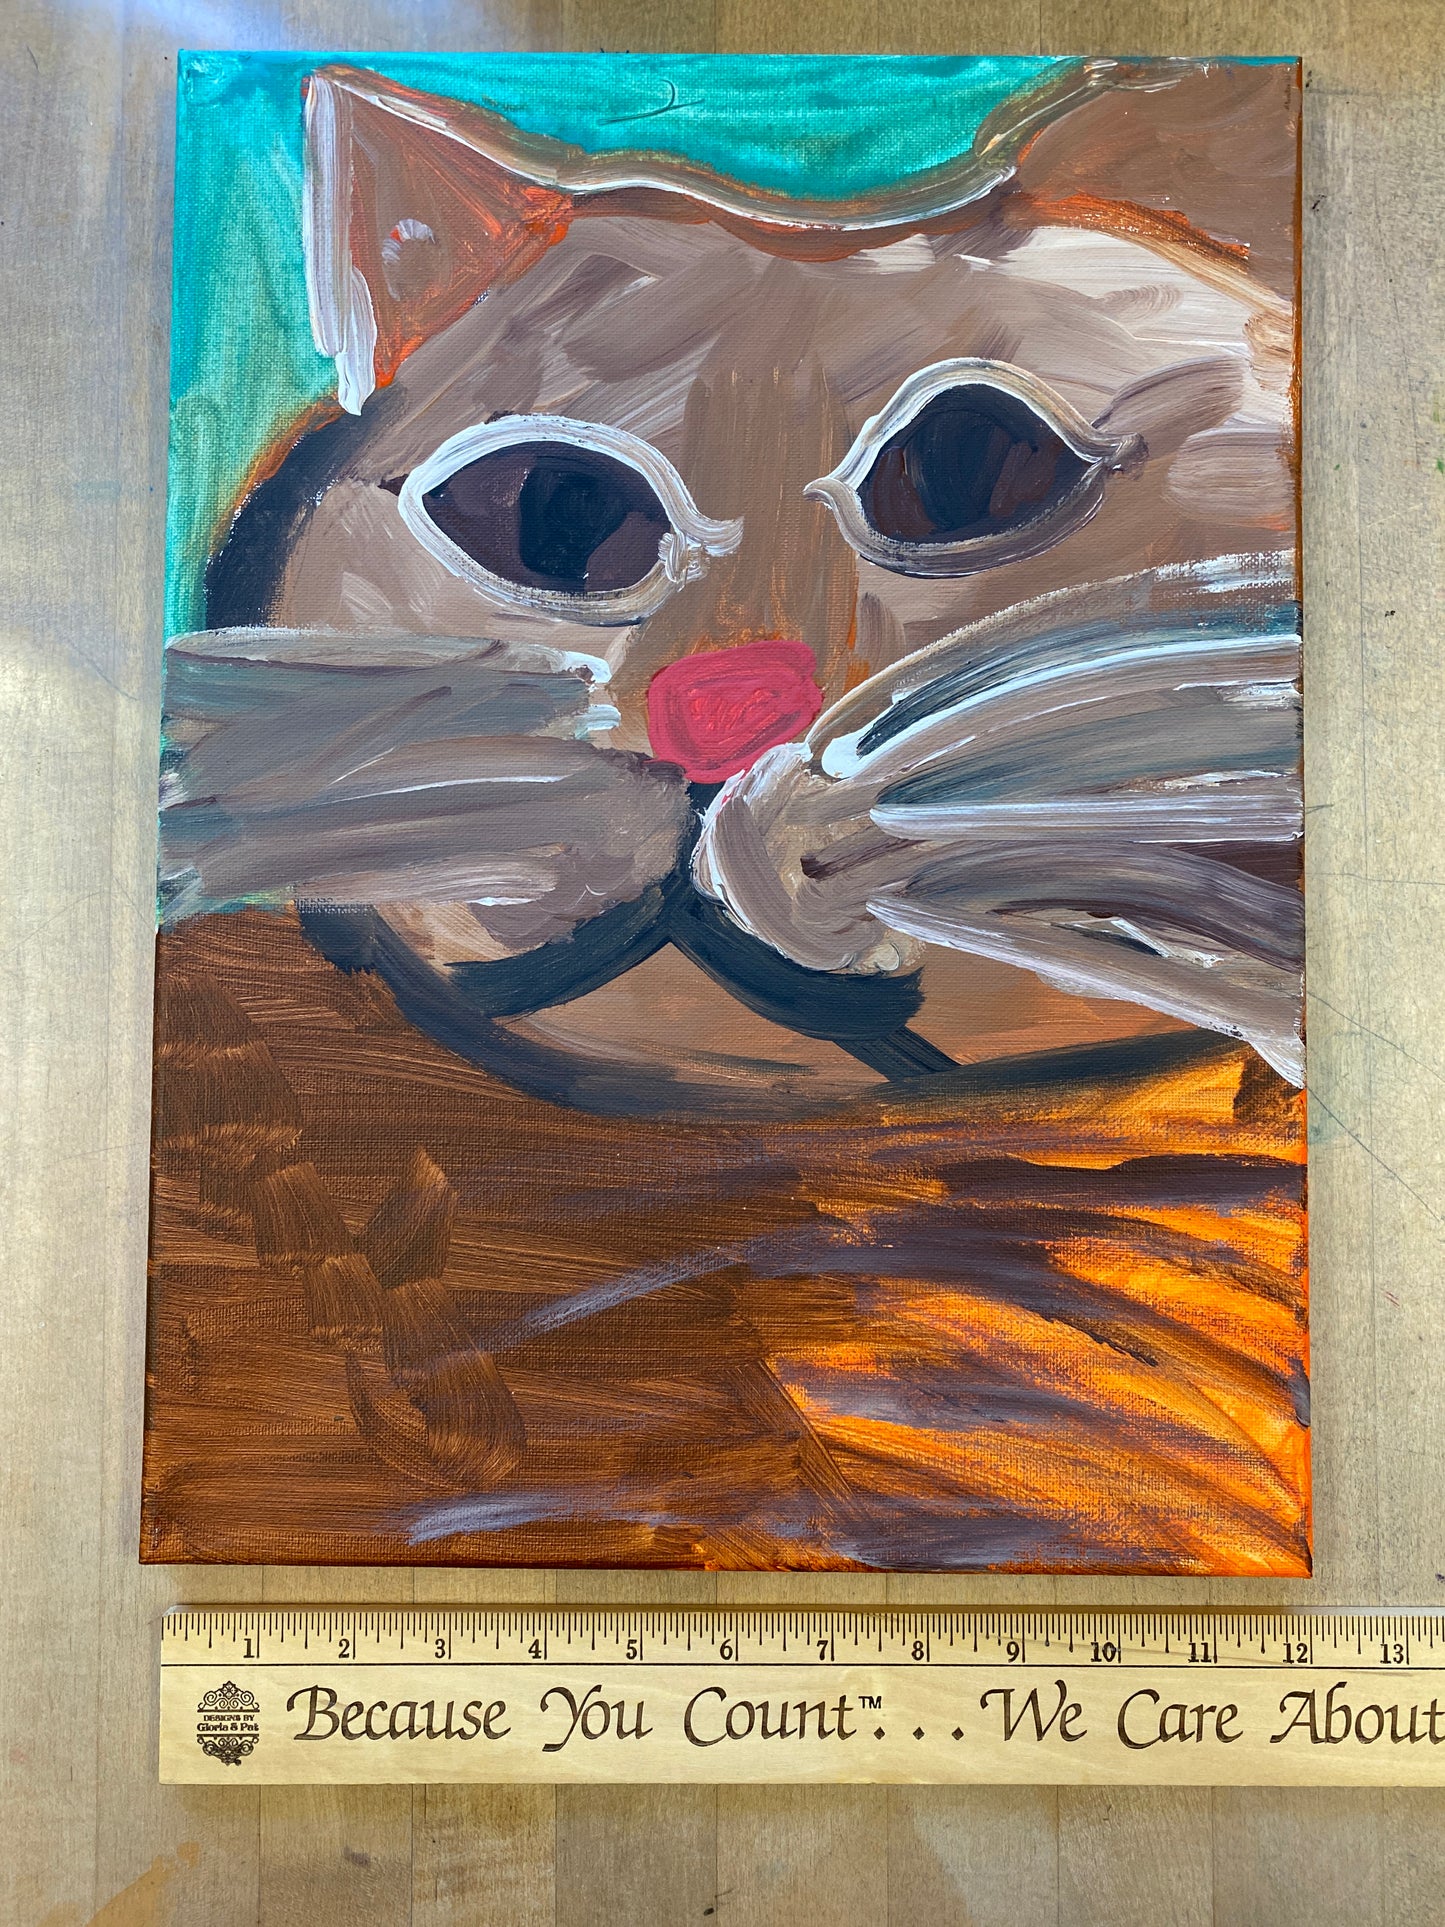 Acrylic Paint on Stretched Canvas, 16 x 12 Original Fine Art, Cat made by Emily Knoles